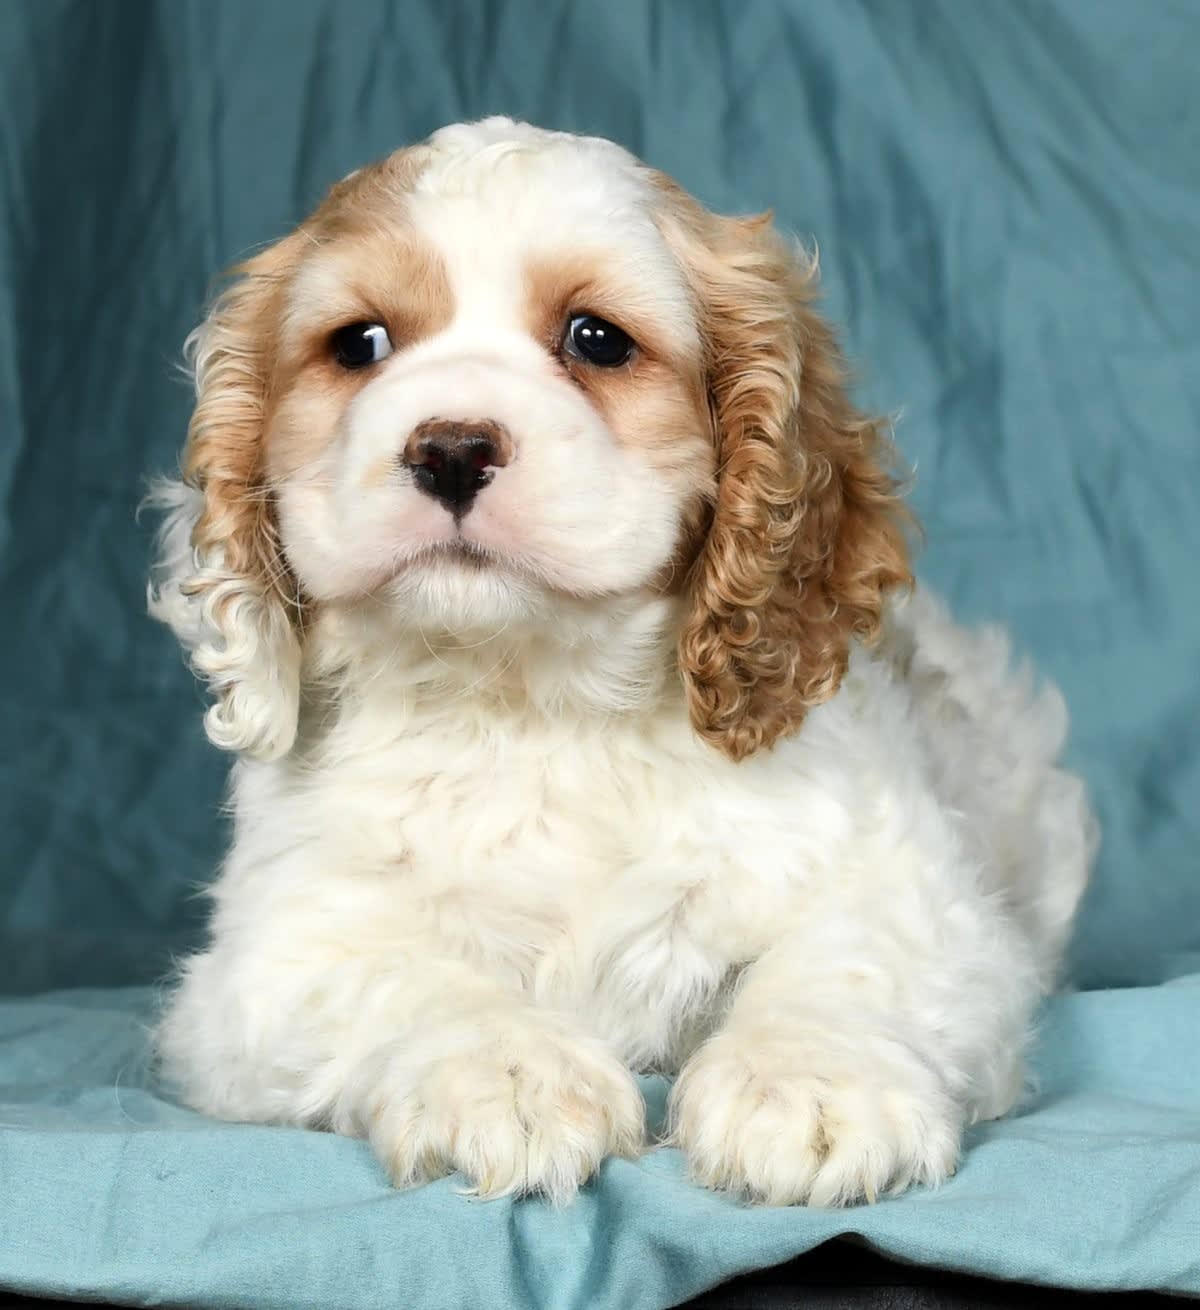 Alex - Cocker Spaniel Puppy for Sale in Baltic, OH | Lancaster Puppies